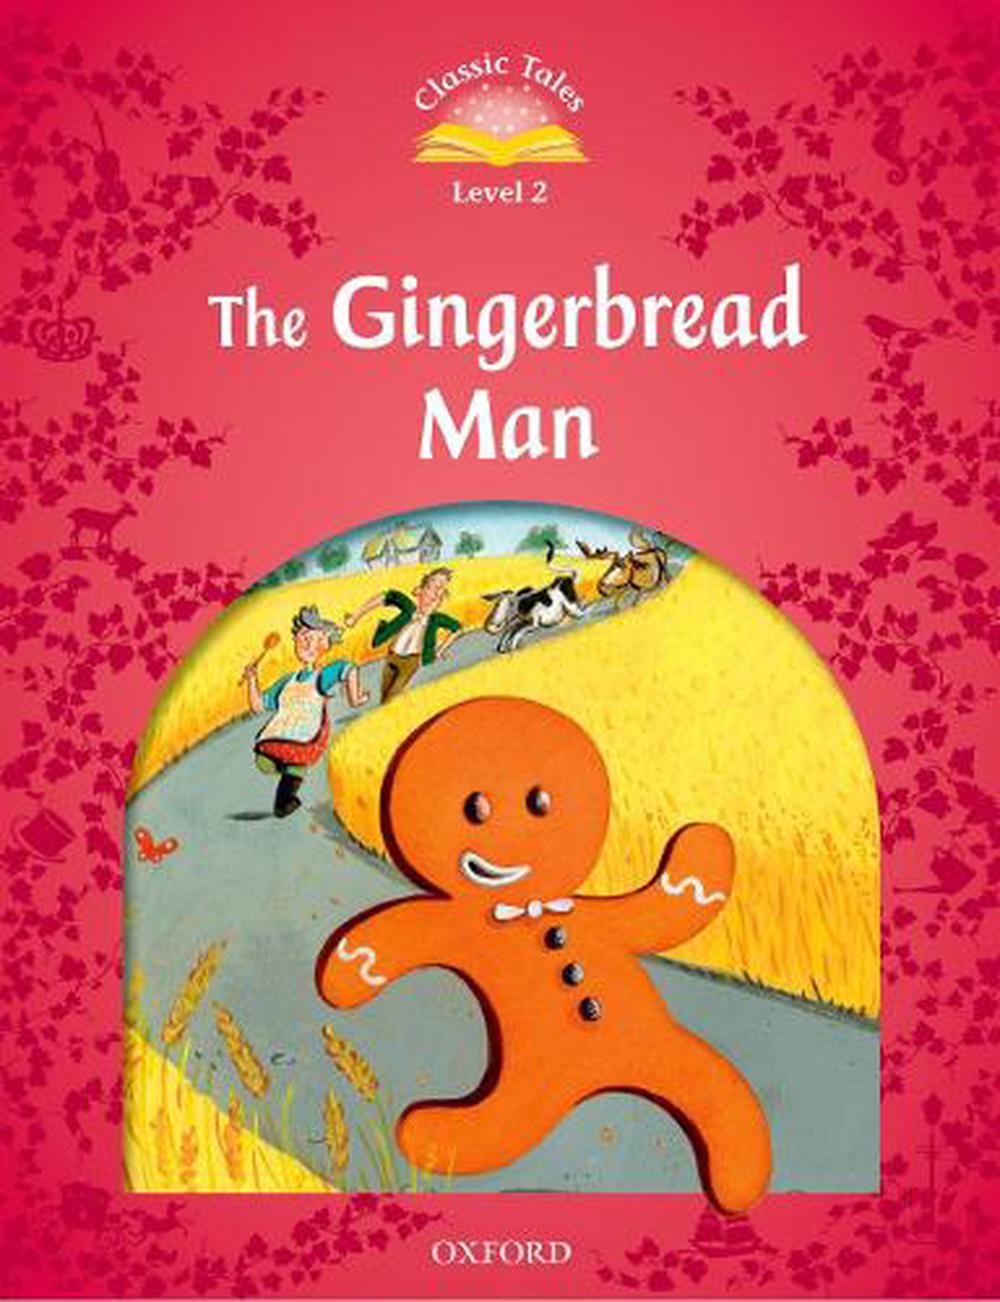 Classic　Edition:　Man　by　Gingerbread　Level　Buy　2:　Tales　Second　Arengo,　The　Paperback,　9780194239066　The　at　Nile　Sue　online